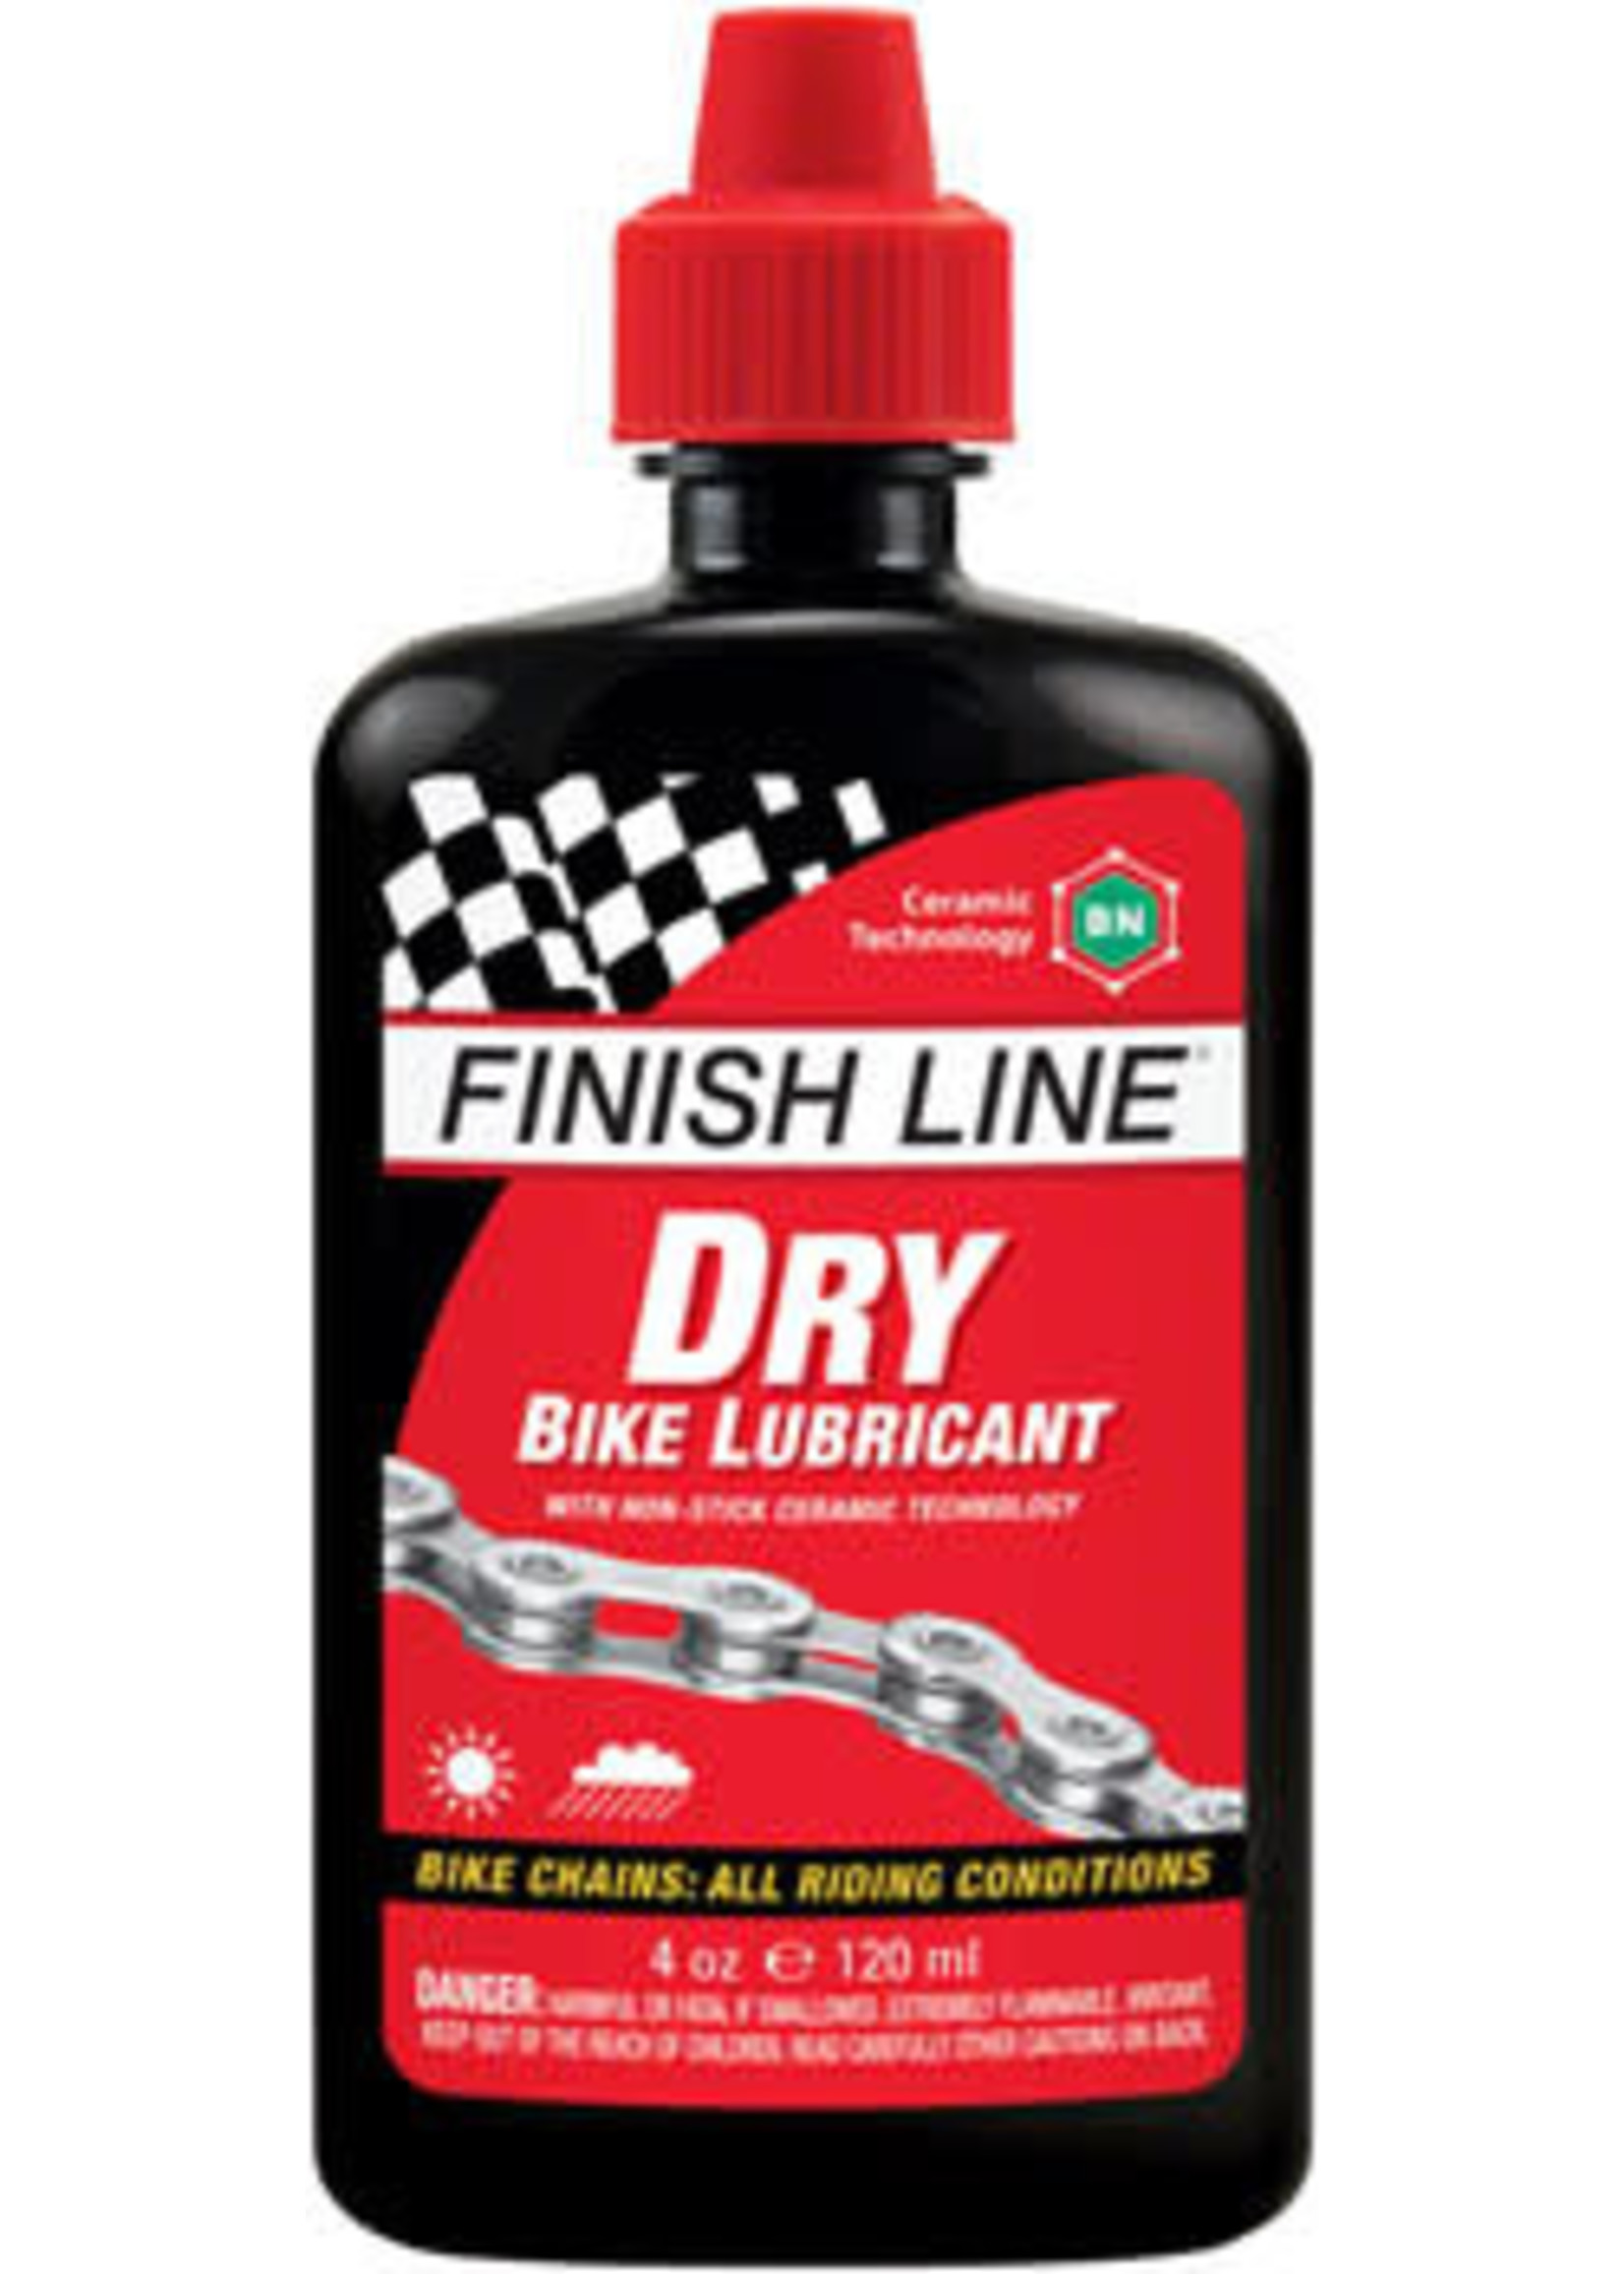 Finish Line Finish Line Dry Lube with Ceramic Technology - 4oz Drip